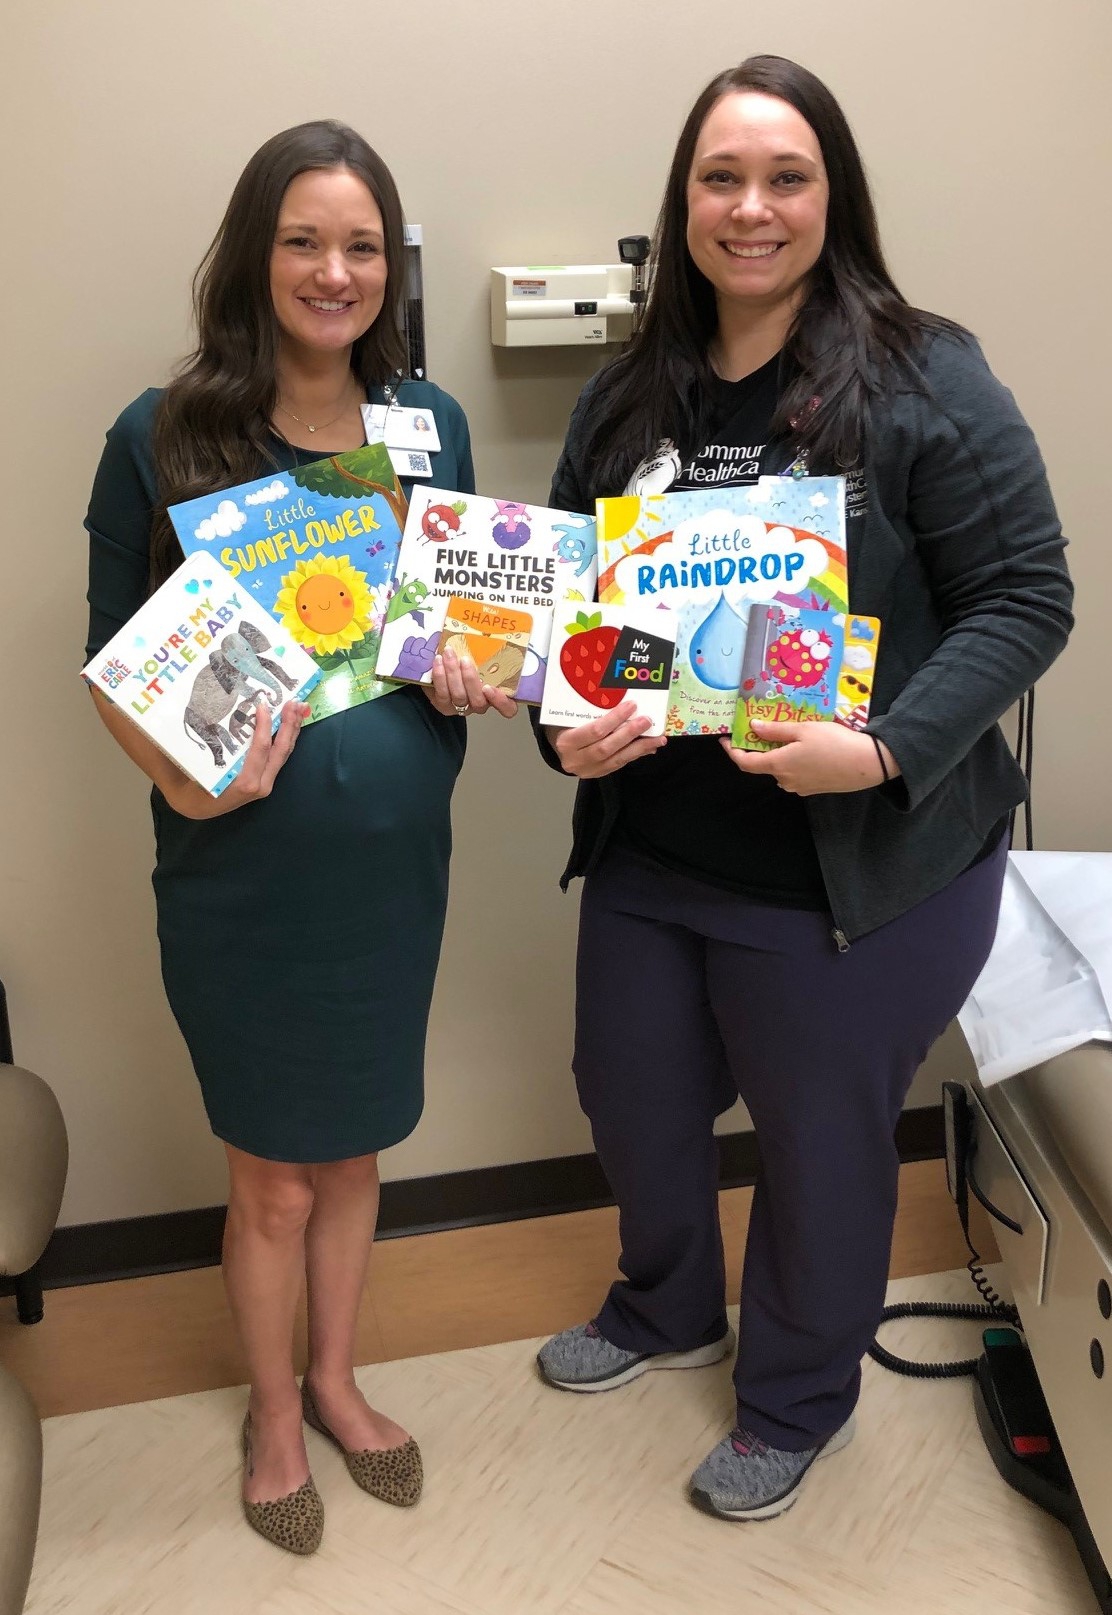 CHCS clinics offer free books for kids